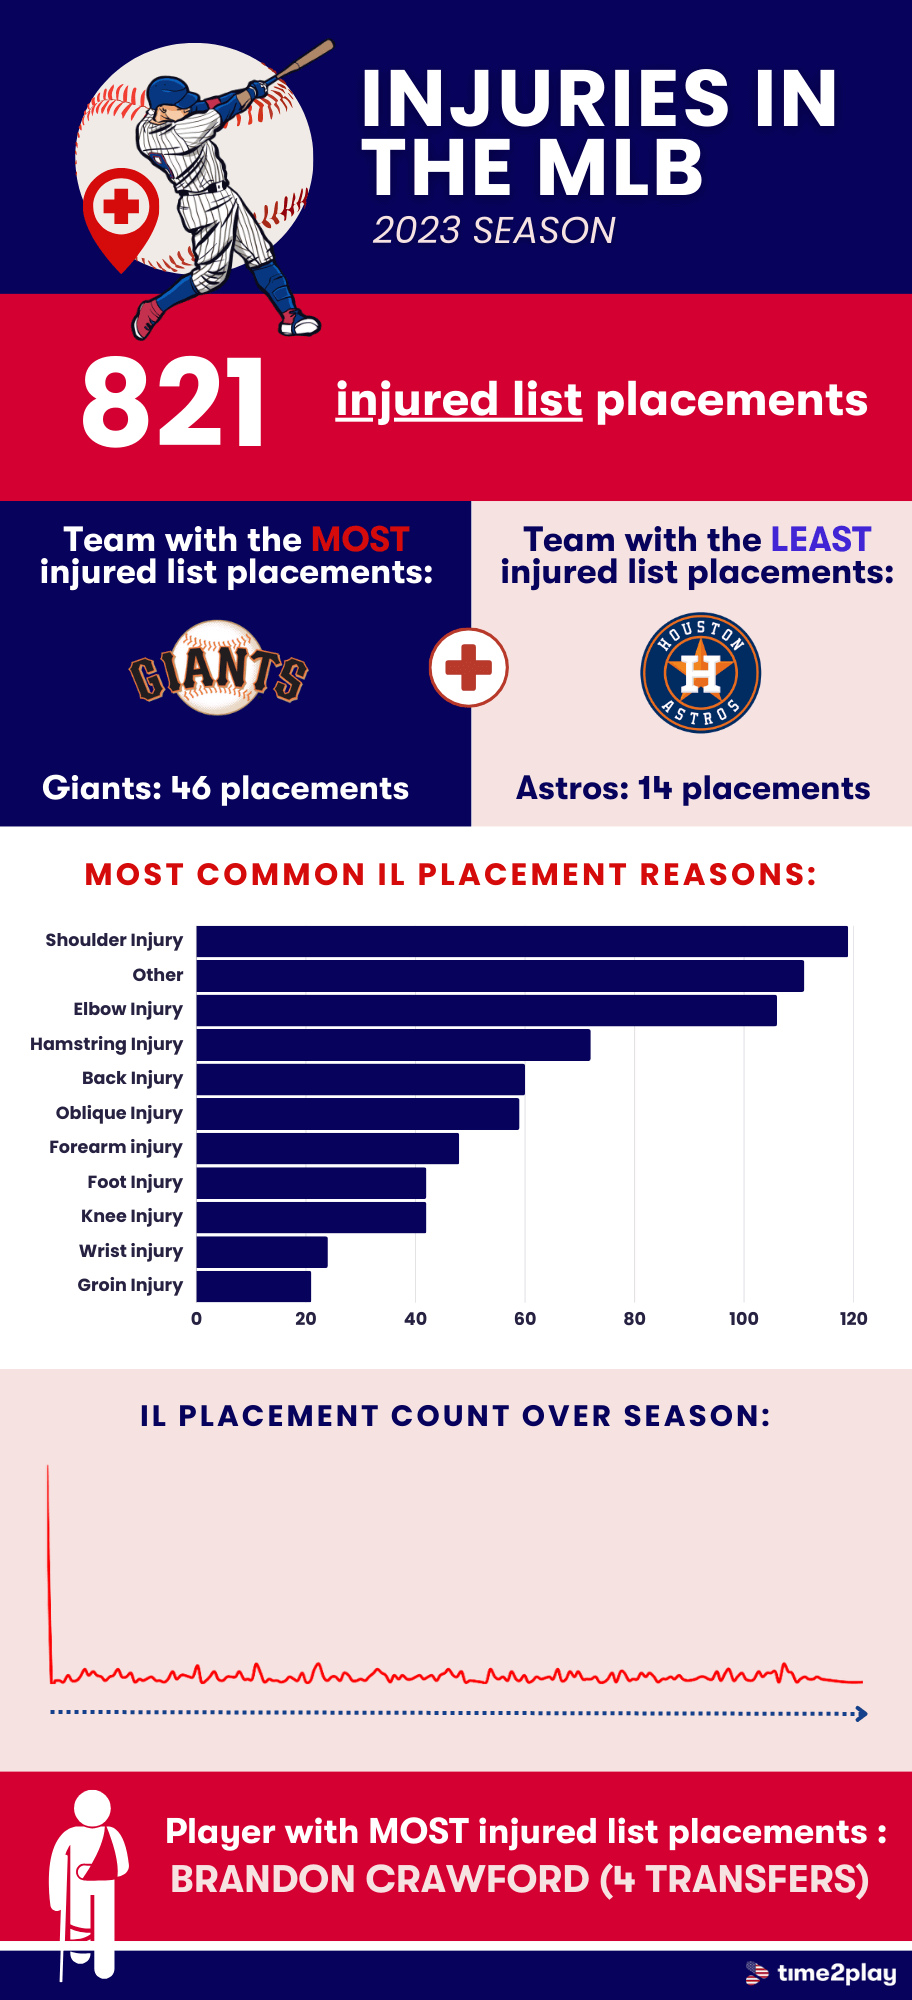 The following image is an infographic presenting data related to the MLB 2023 regular season injured list